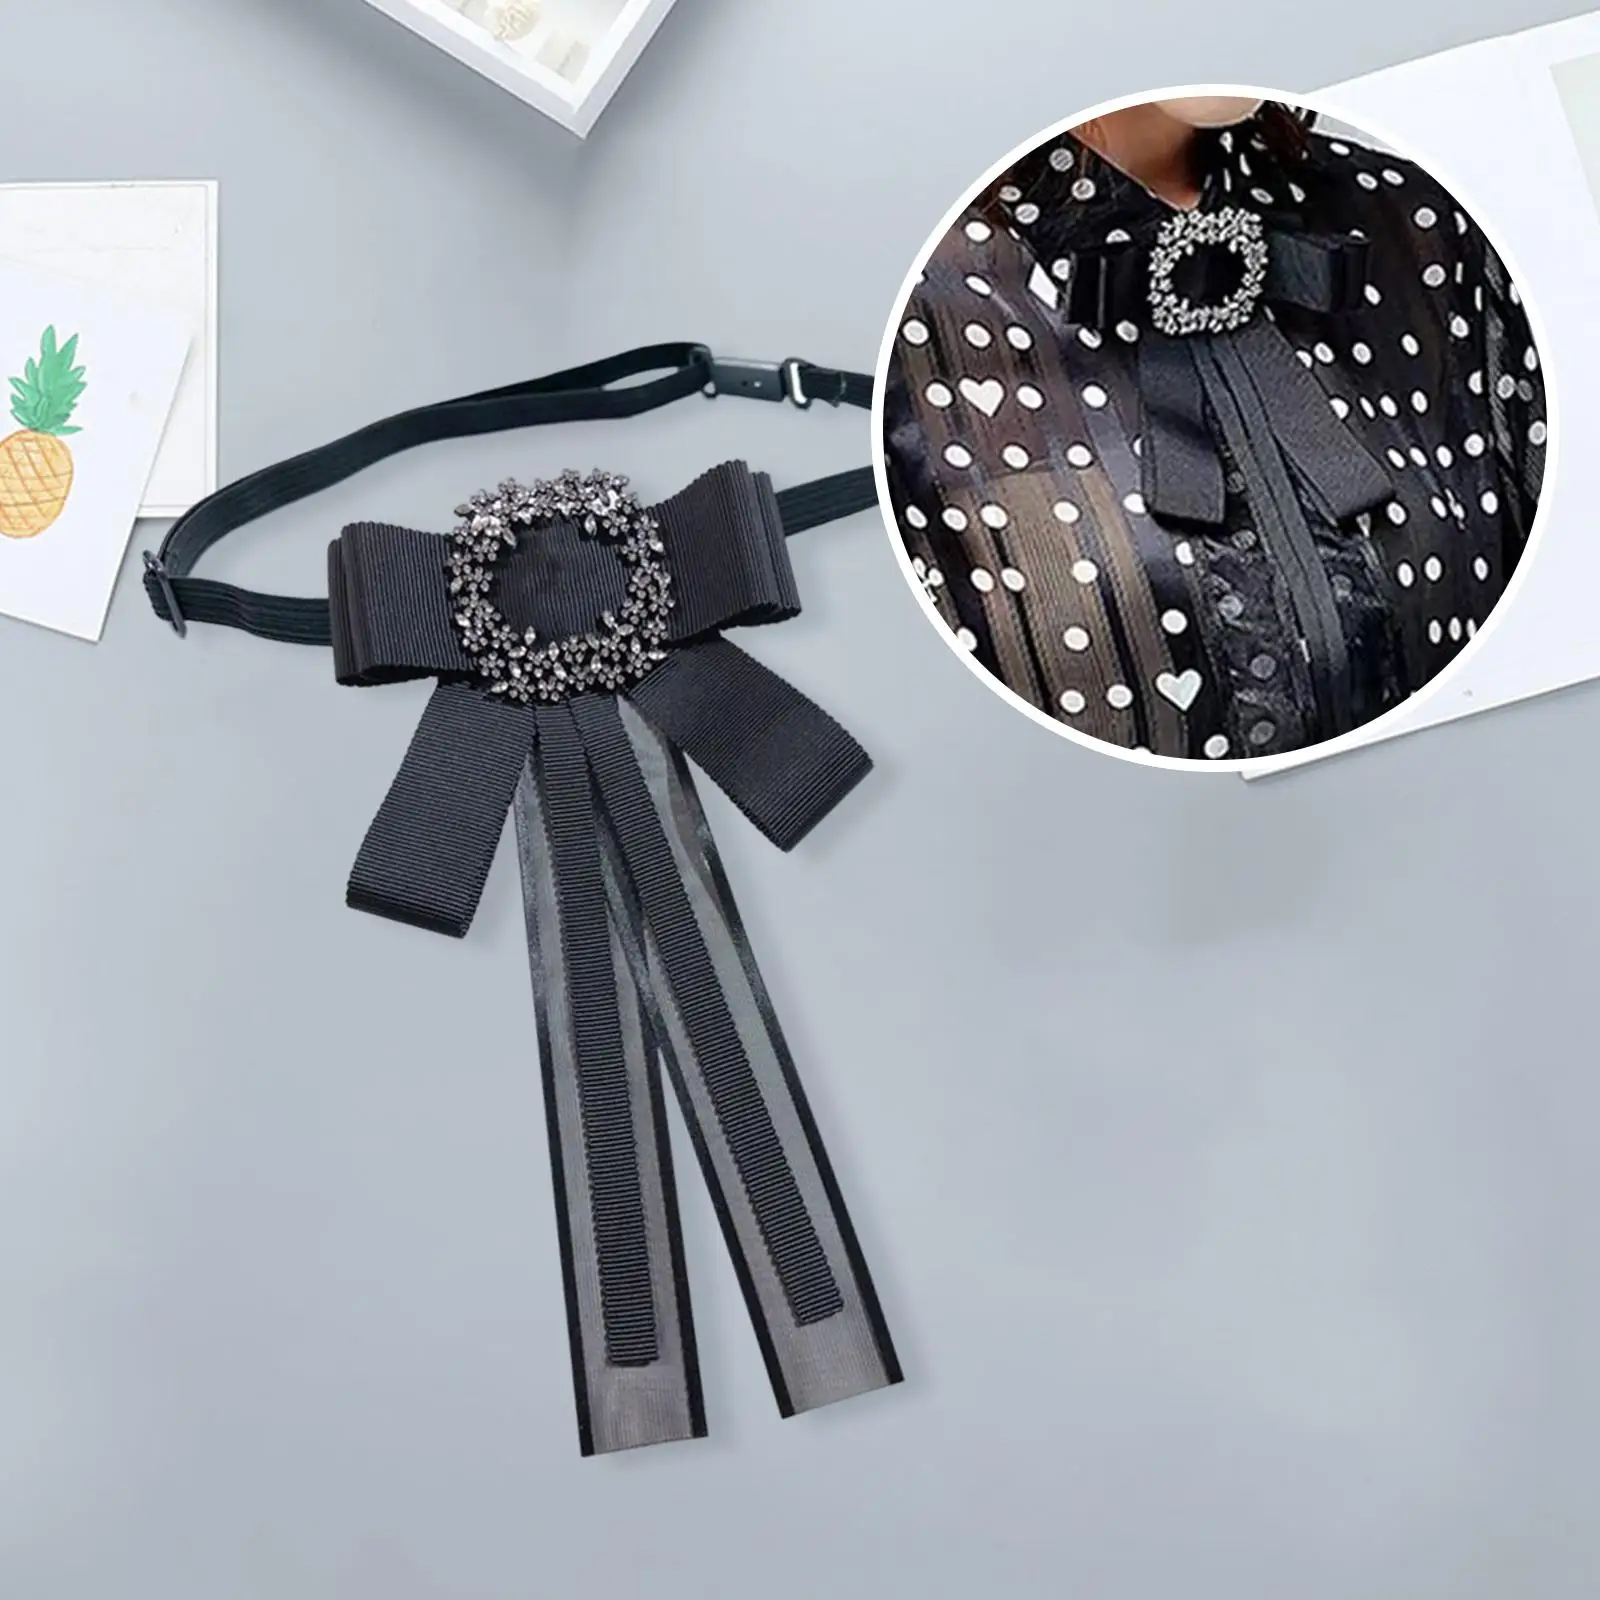 Retro Style Bow Tie Lady Clothing Accessories Bowknot Lapel Pin Solid Color Black Necktie for Dress Wedding Graduation Vest Work